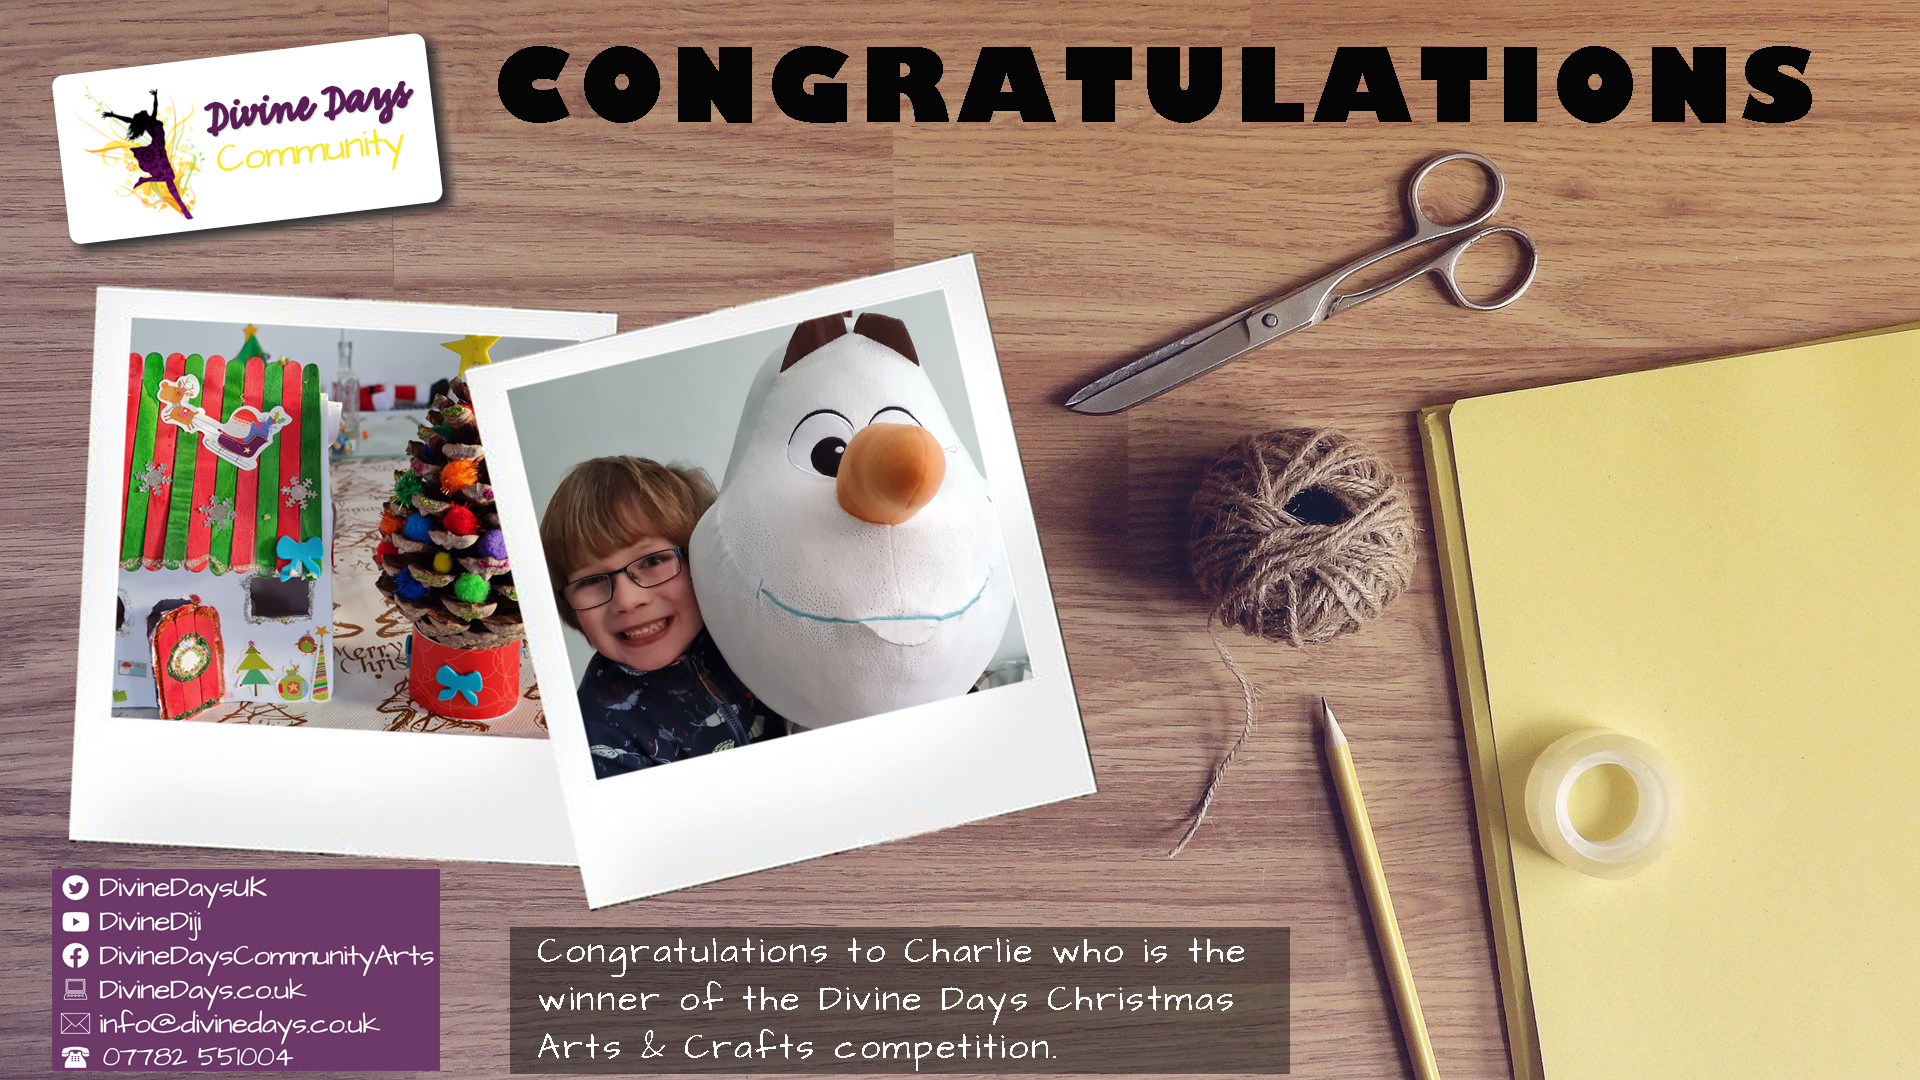 Congratulations to Charlie who is the winner of the divine days Christmas arts and crafts competition